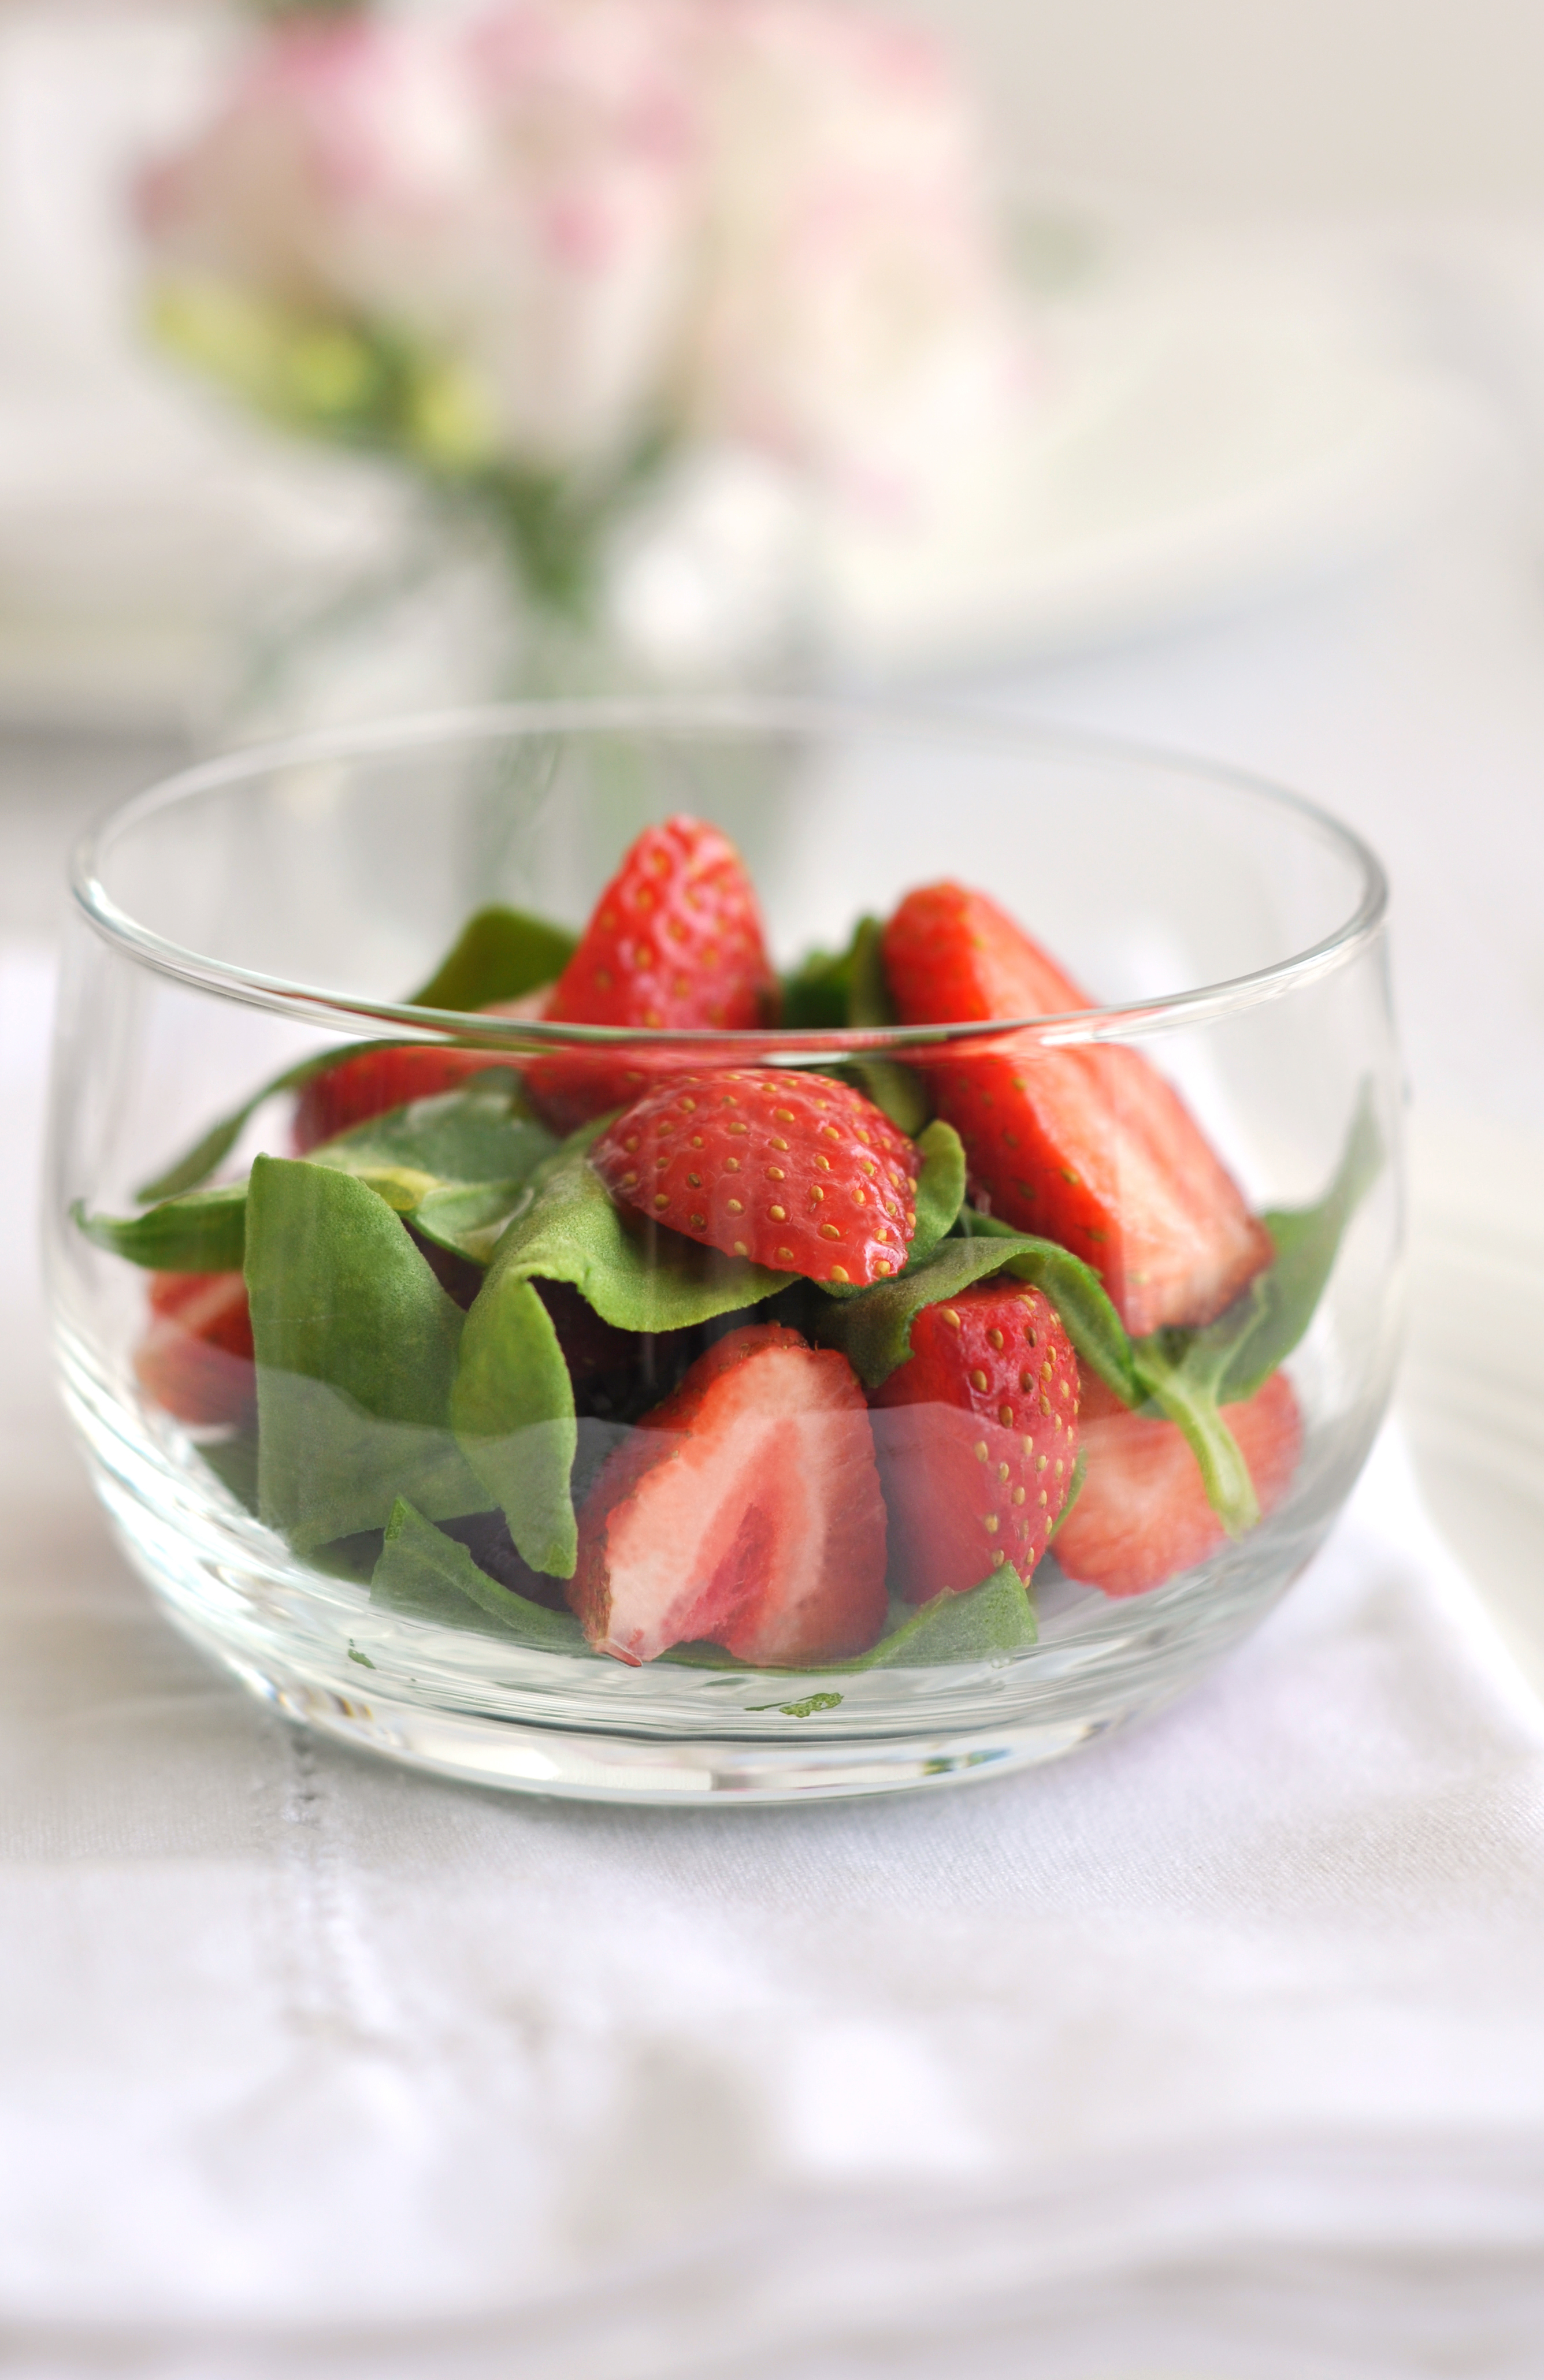 Spinach and Strawberry Salad with Pepper Vinaigrette